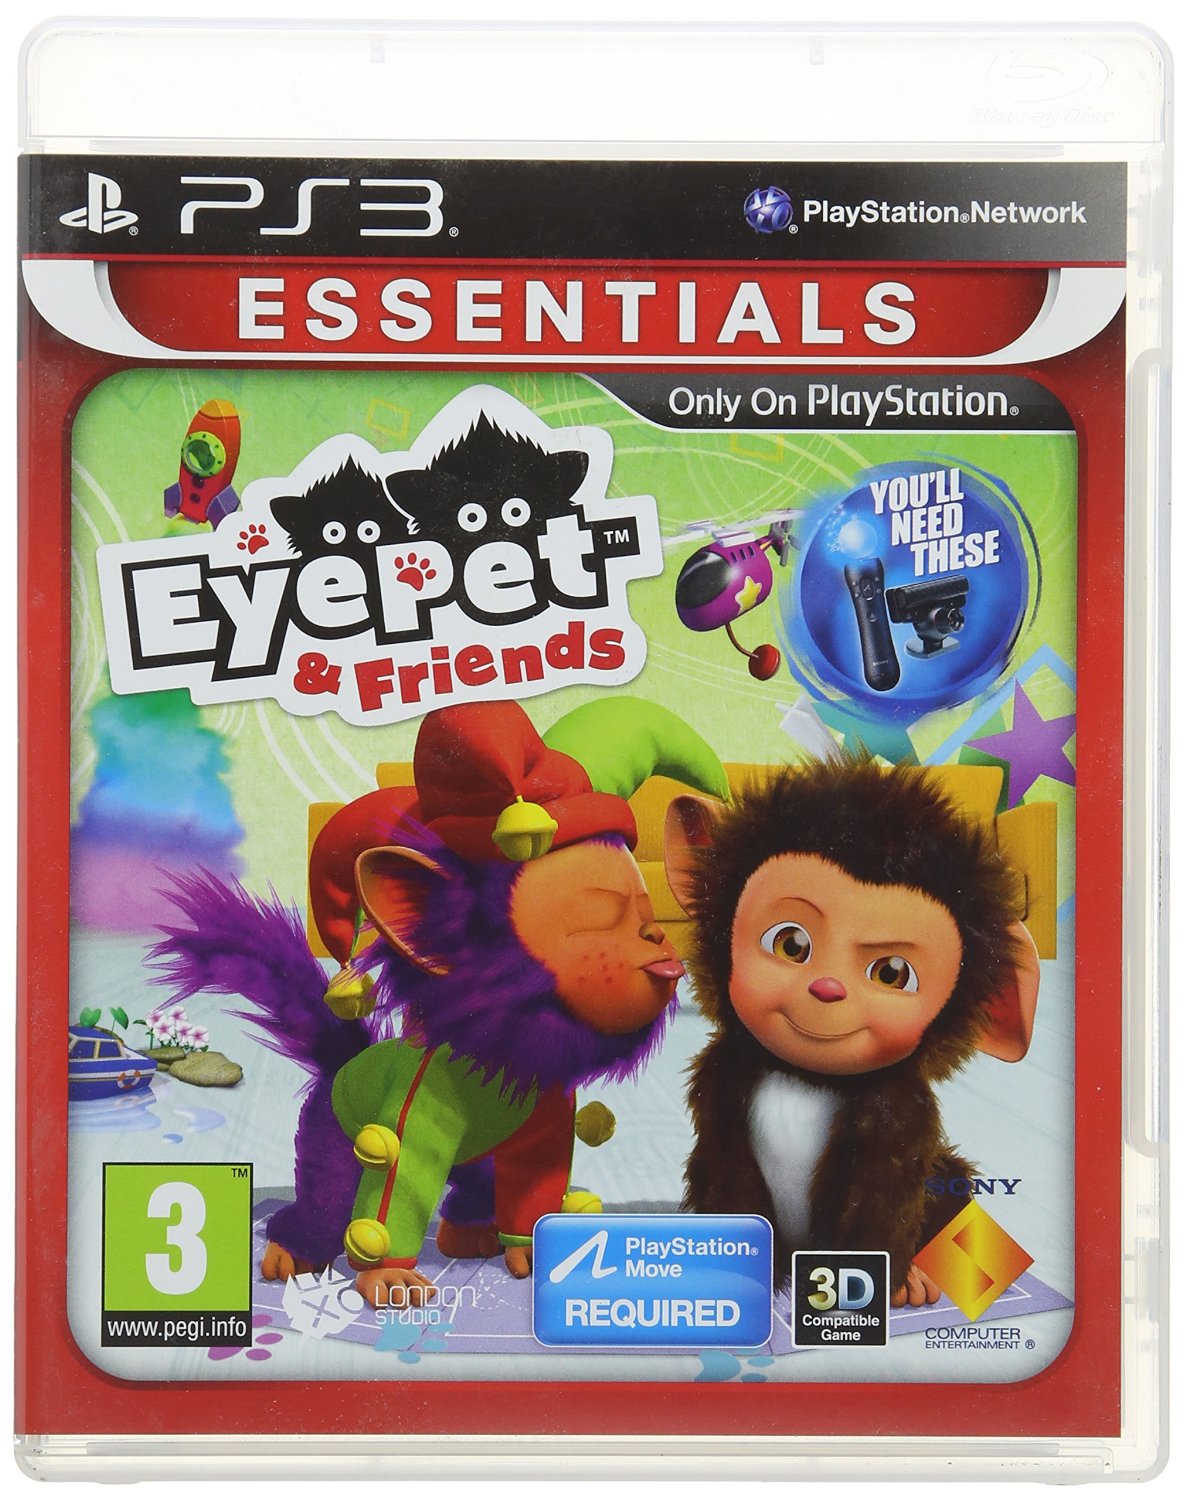 EyePet & Friends - Move (PS3)